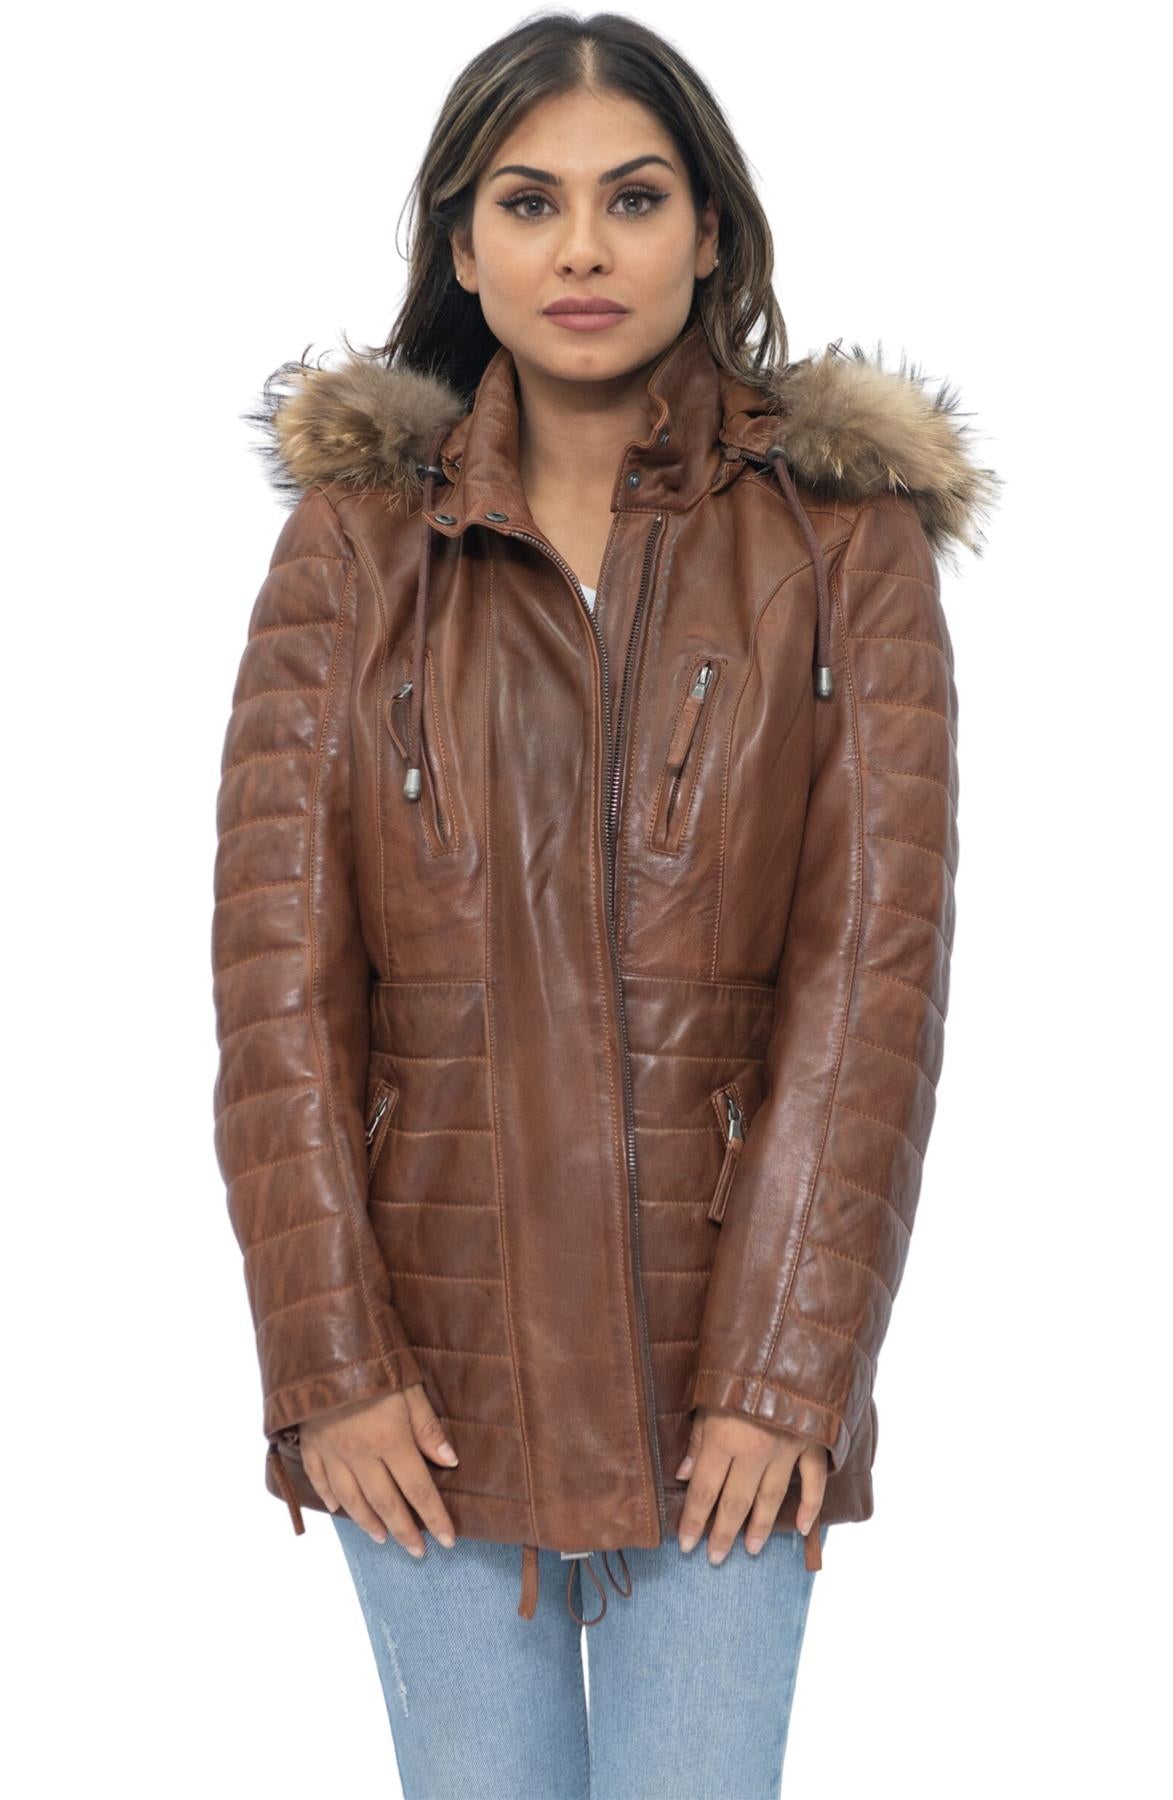 Womens Quilted Leather Parka Jacket-Curitiba